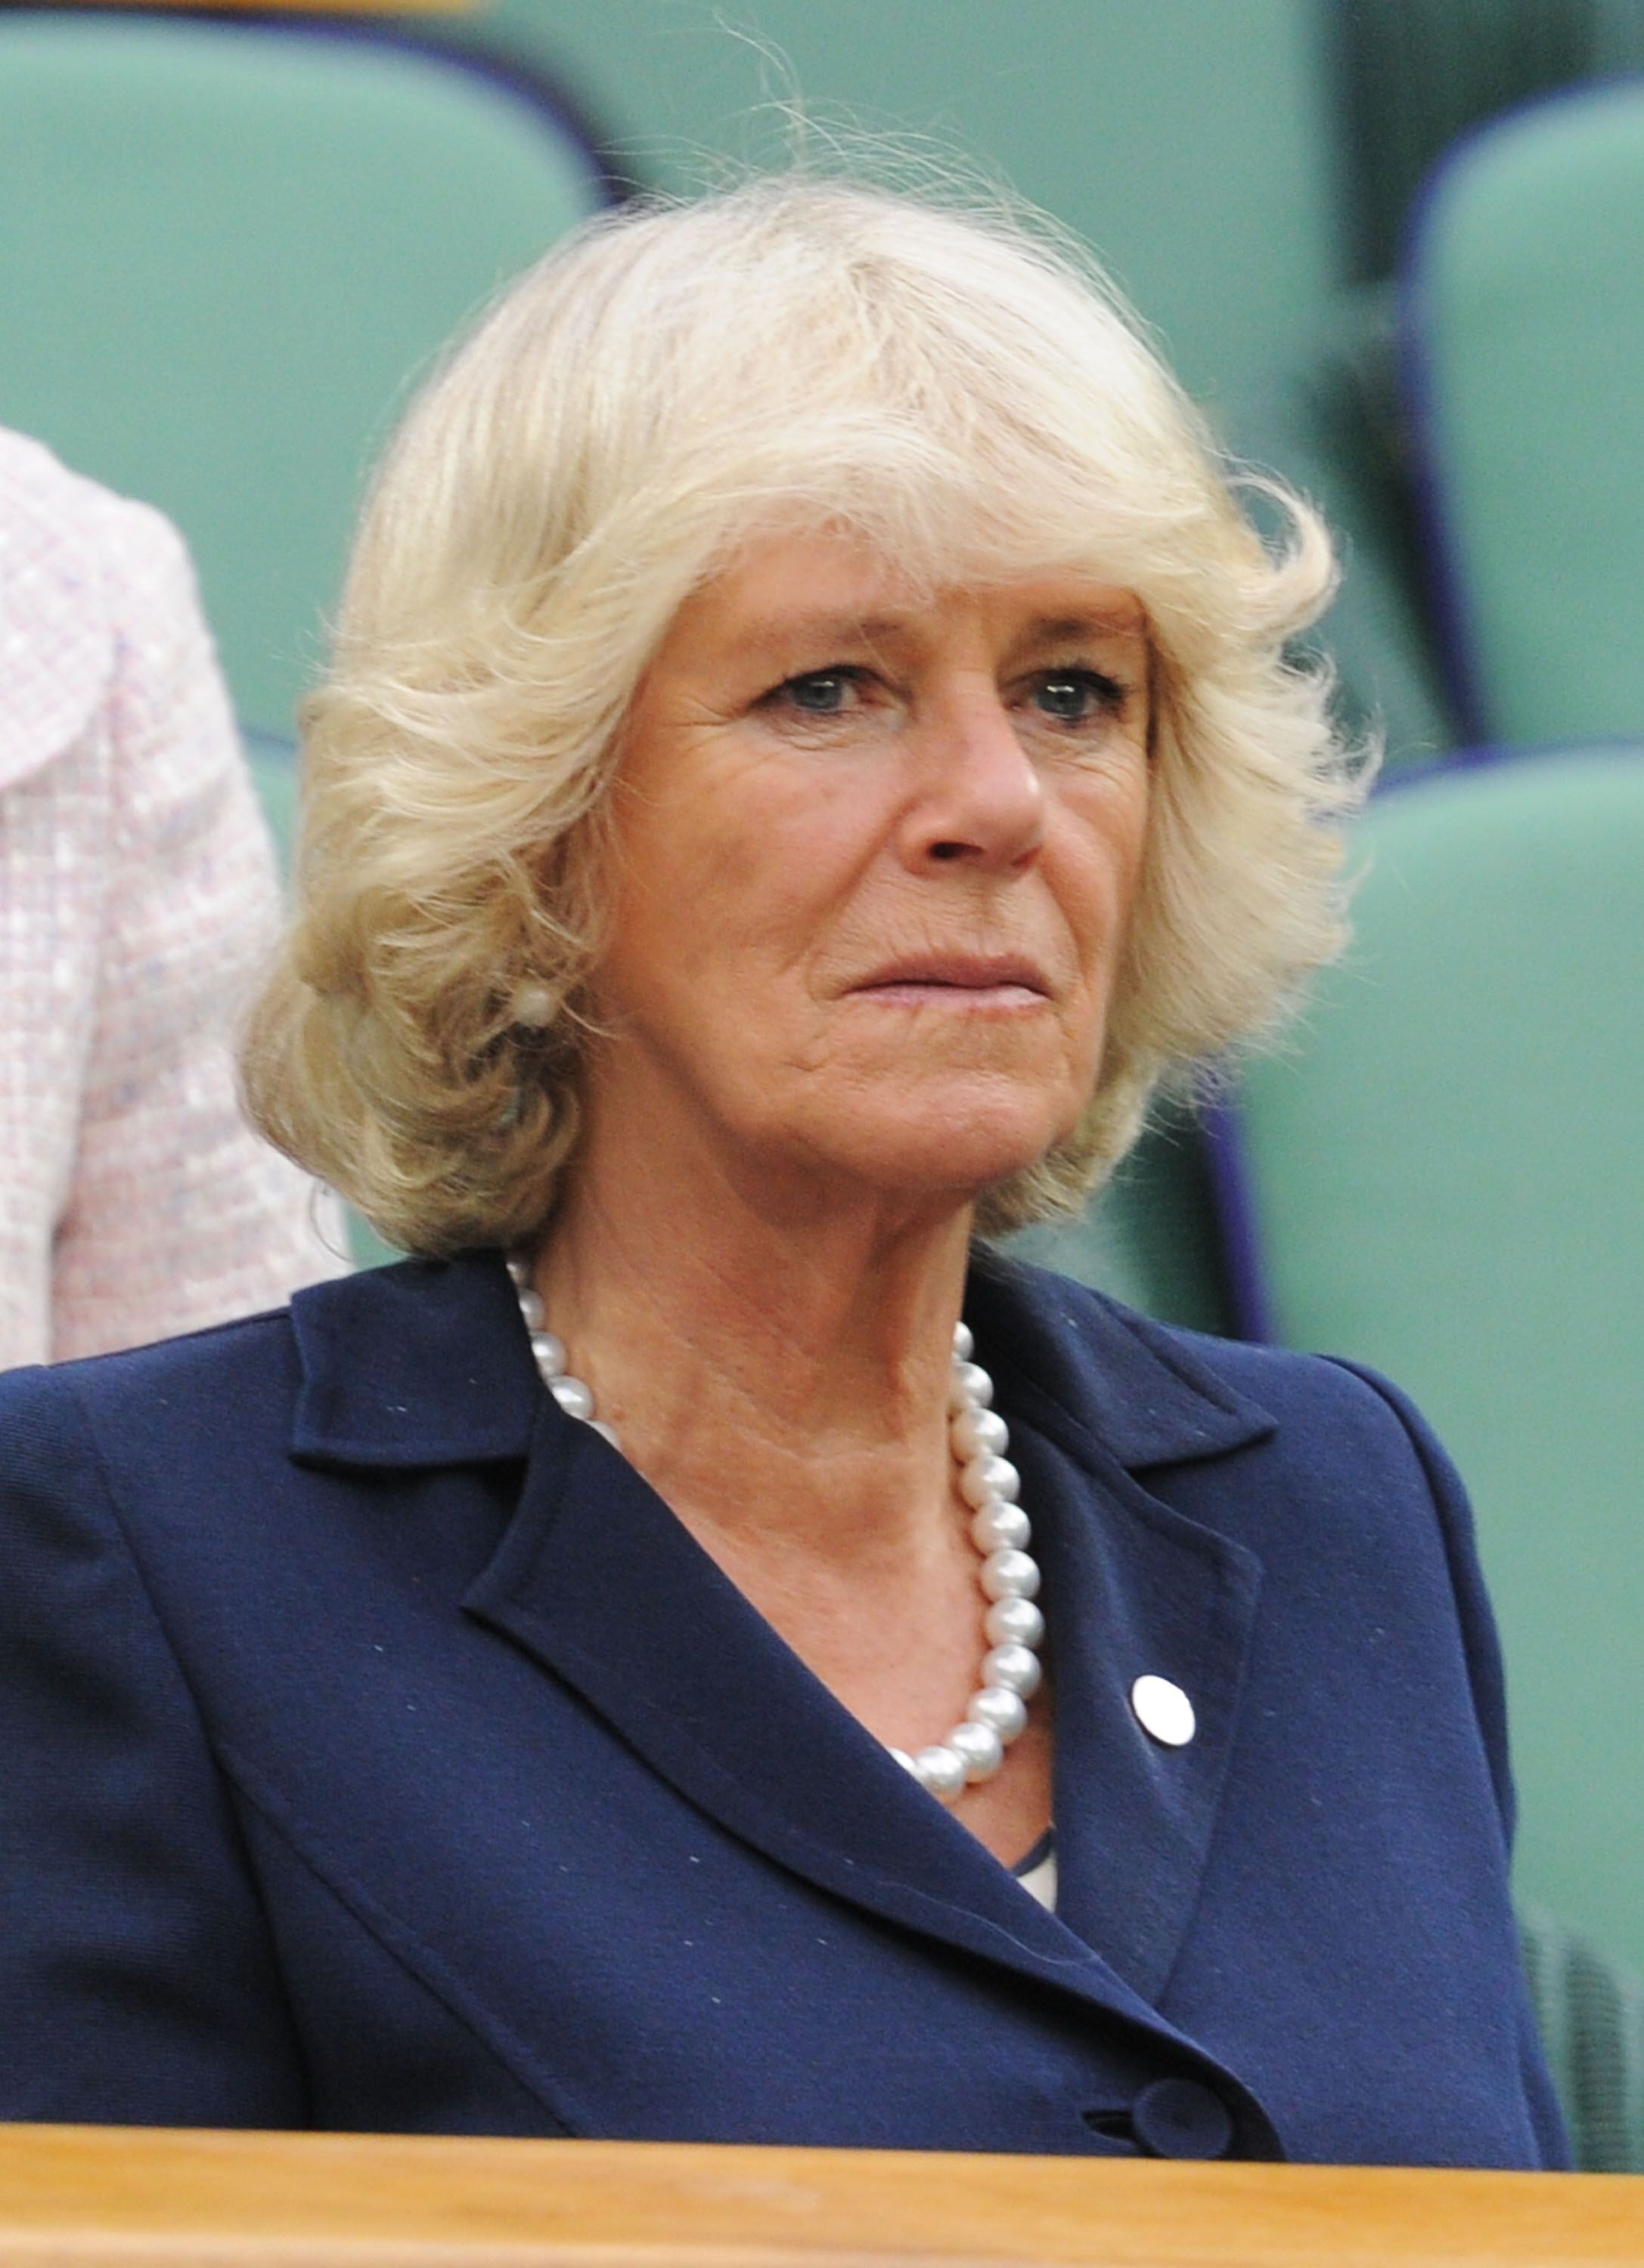 Duchess Camilla at a tennis match at the Wimbledon Lawn Tennis Championships on June 22, 2011, in London, England. | Source: Getty Images